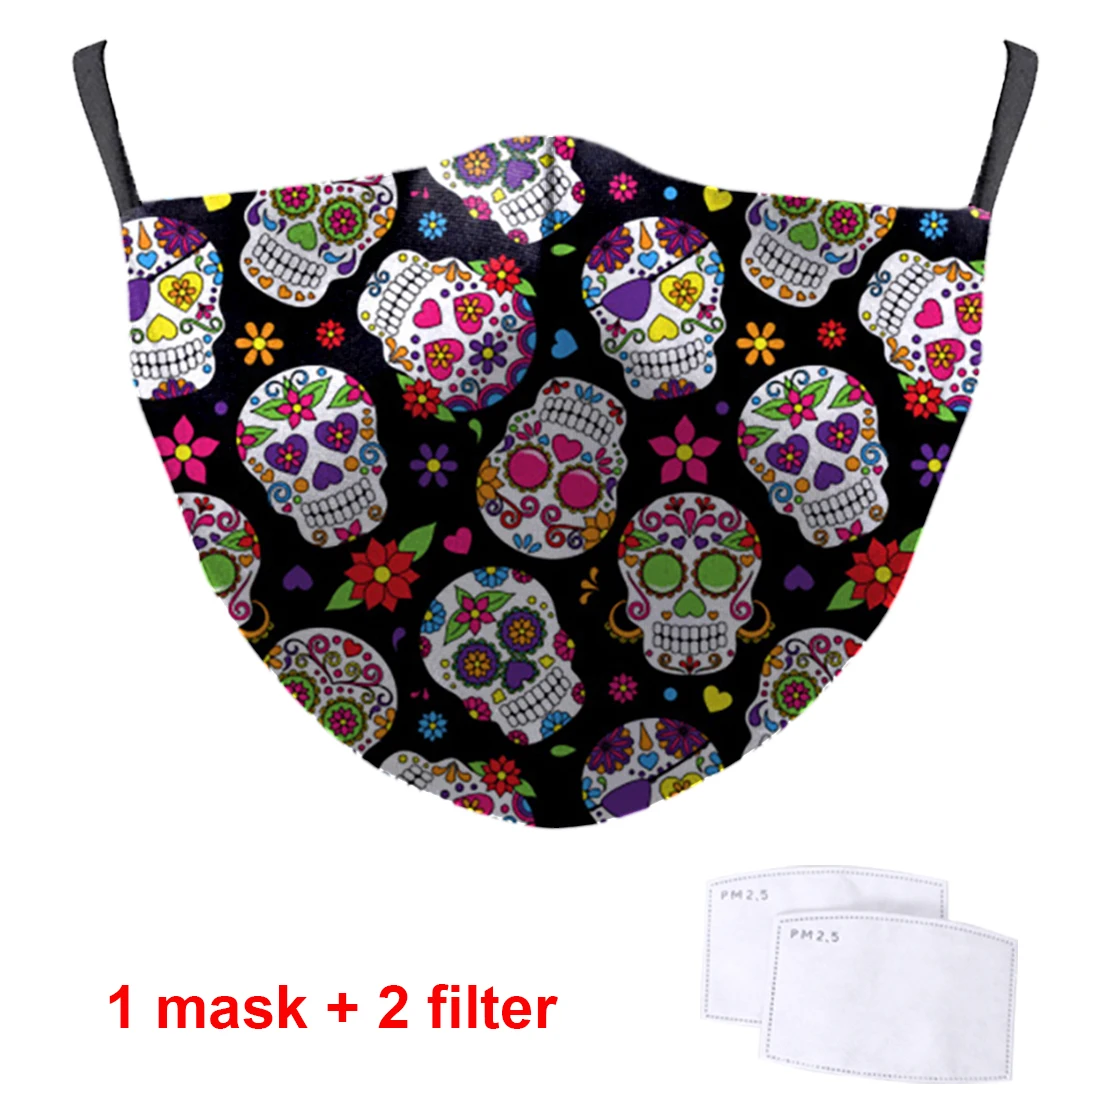 

Skull Cartoon 3D Adult Washable Face Masks PM2.5 Activated Carbon Filter Paper Breathable Anti Haze Male Comfortable Mascarillas